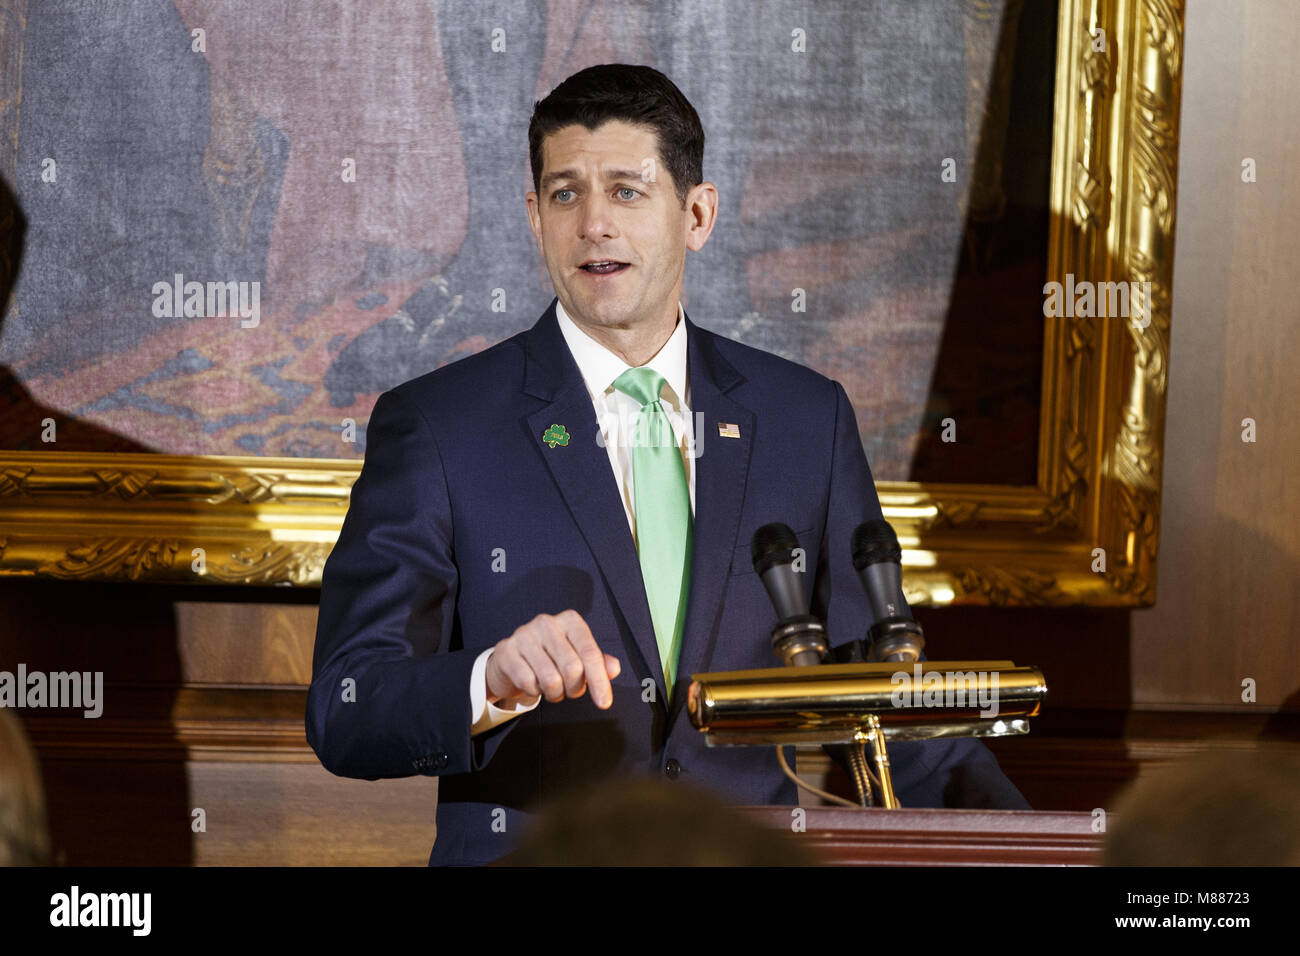 Washington, District of Columbia, USA. 15th Mar, 2018. United States Speaker of the House of Representatives Paul Ryan, Republican of Wisconsin, speaks at the Friends of Ireland luncheon at the United States Capitol in Washington, DC on March 15, 2018. Credit: Alex Edelman/CNP Credit: Alex Edelman/CNP/ZUMA Wire/Alamy Live News Stock Photo